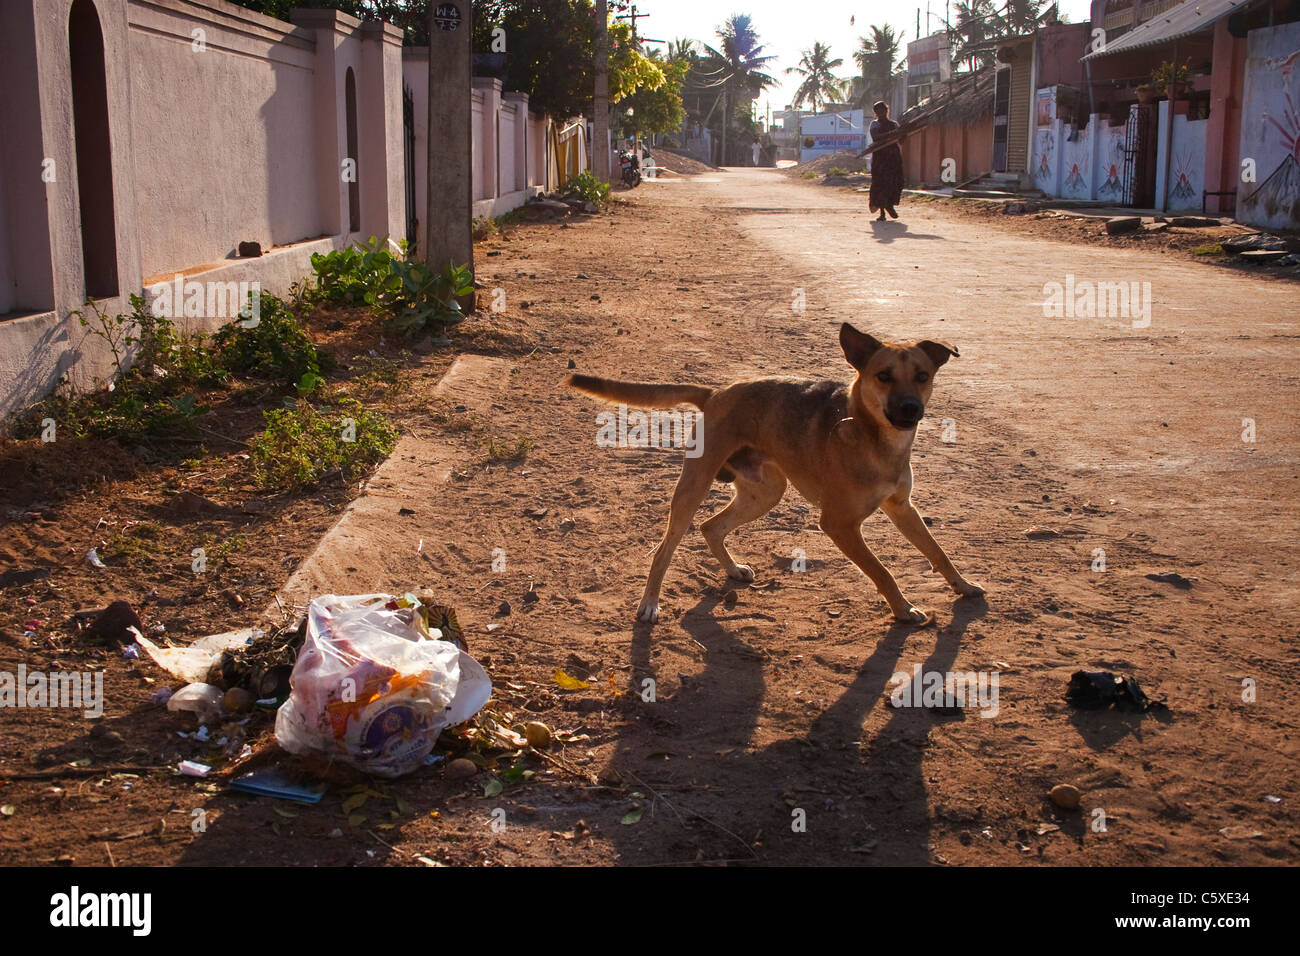 A stray dog scavenging in rubbish on an Indian street Stock Photo